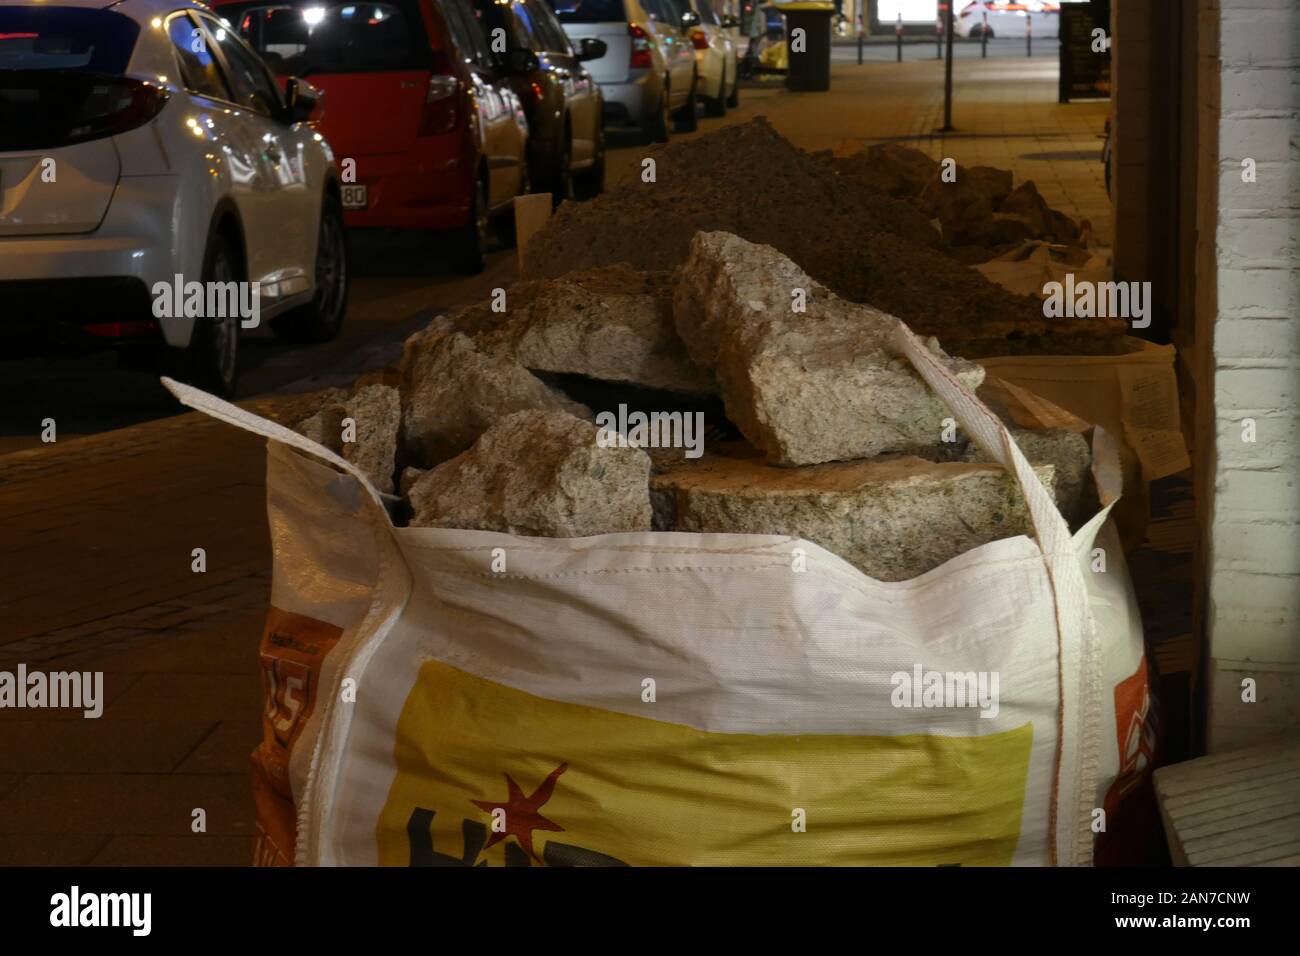 Garbage bags filled with rubble standing on the street at night, Germany, Europe Stock Photo